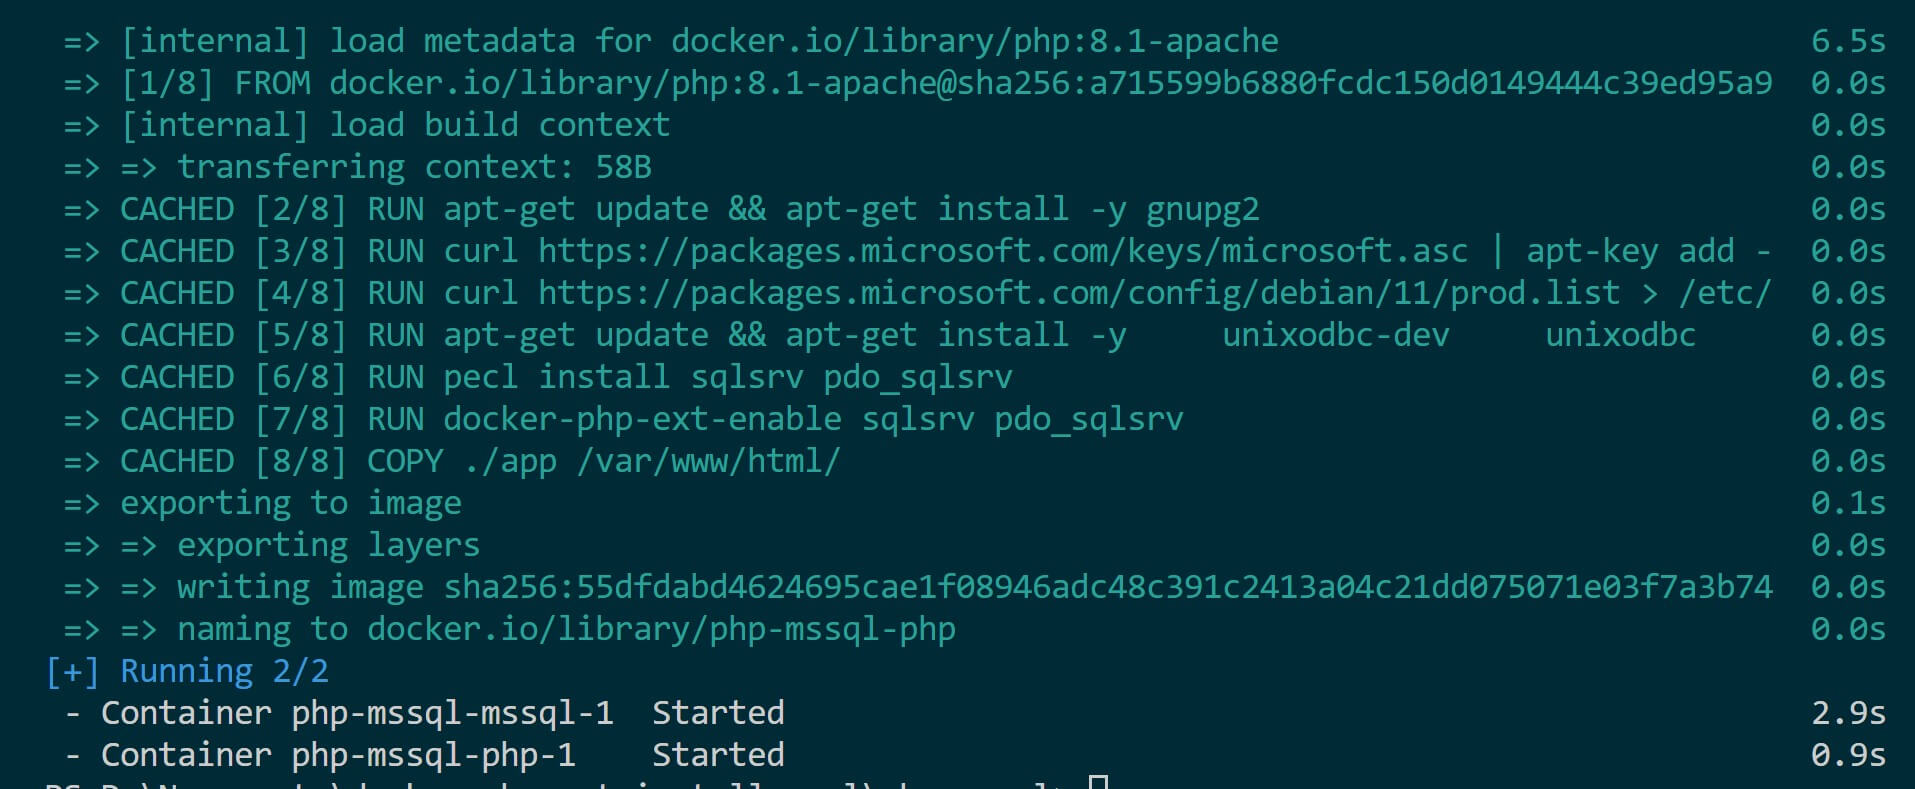 PHP and MSSQL on Docker with pecl install sqlsrv pdo_sqlsrv